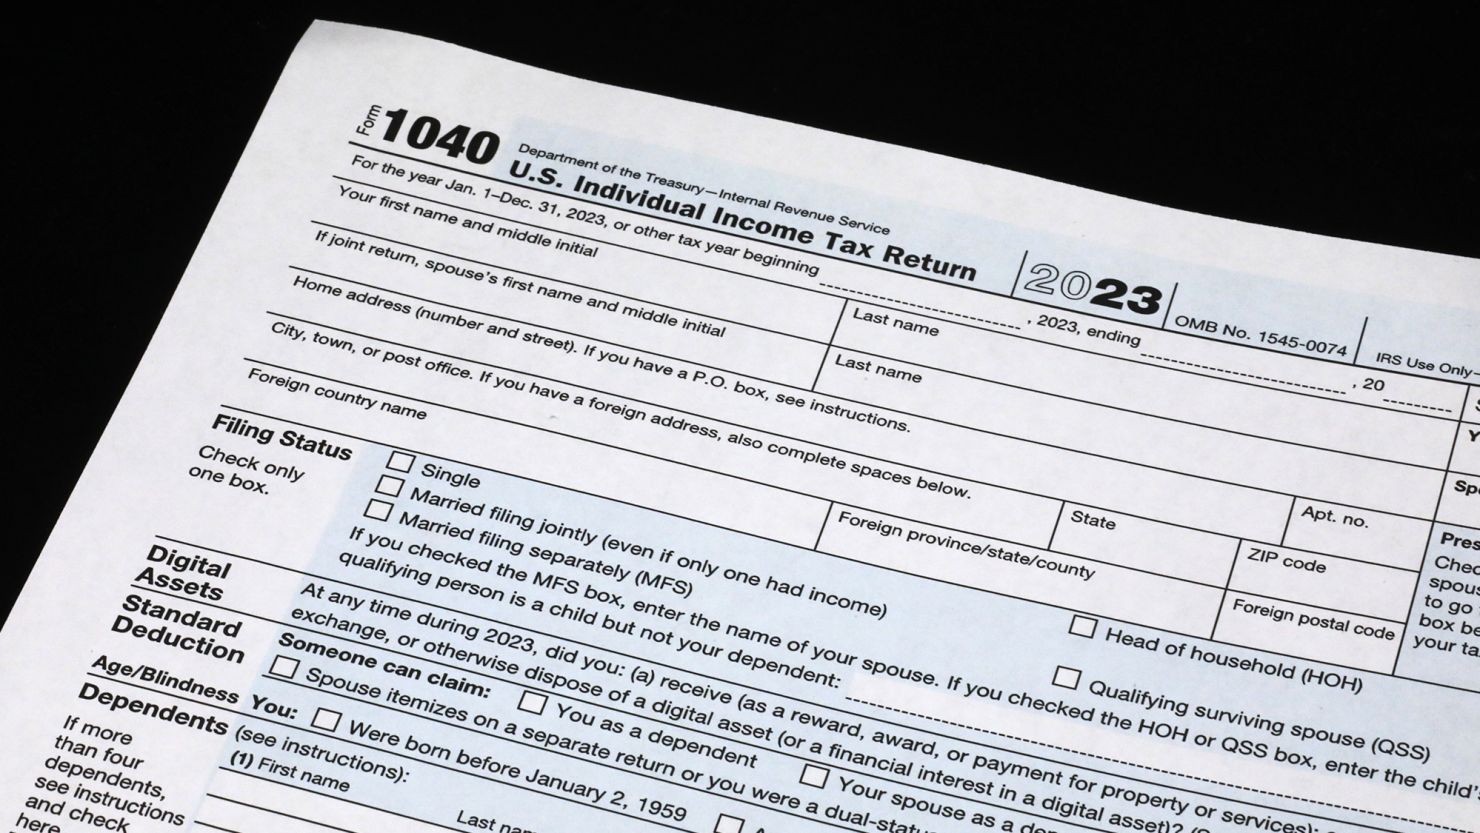 If you can't file your taxes or pay the IRS what you owe by April 15, you should apply for an automatic six-month filing extension and try to send a partial payment by Monday.